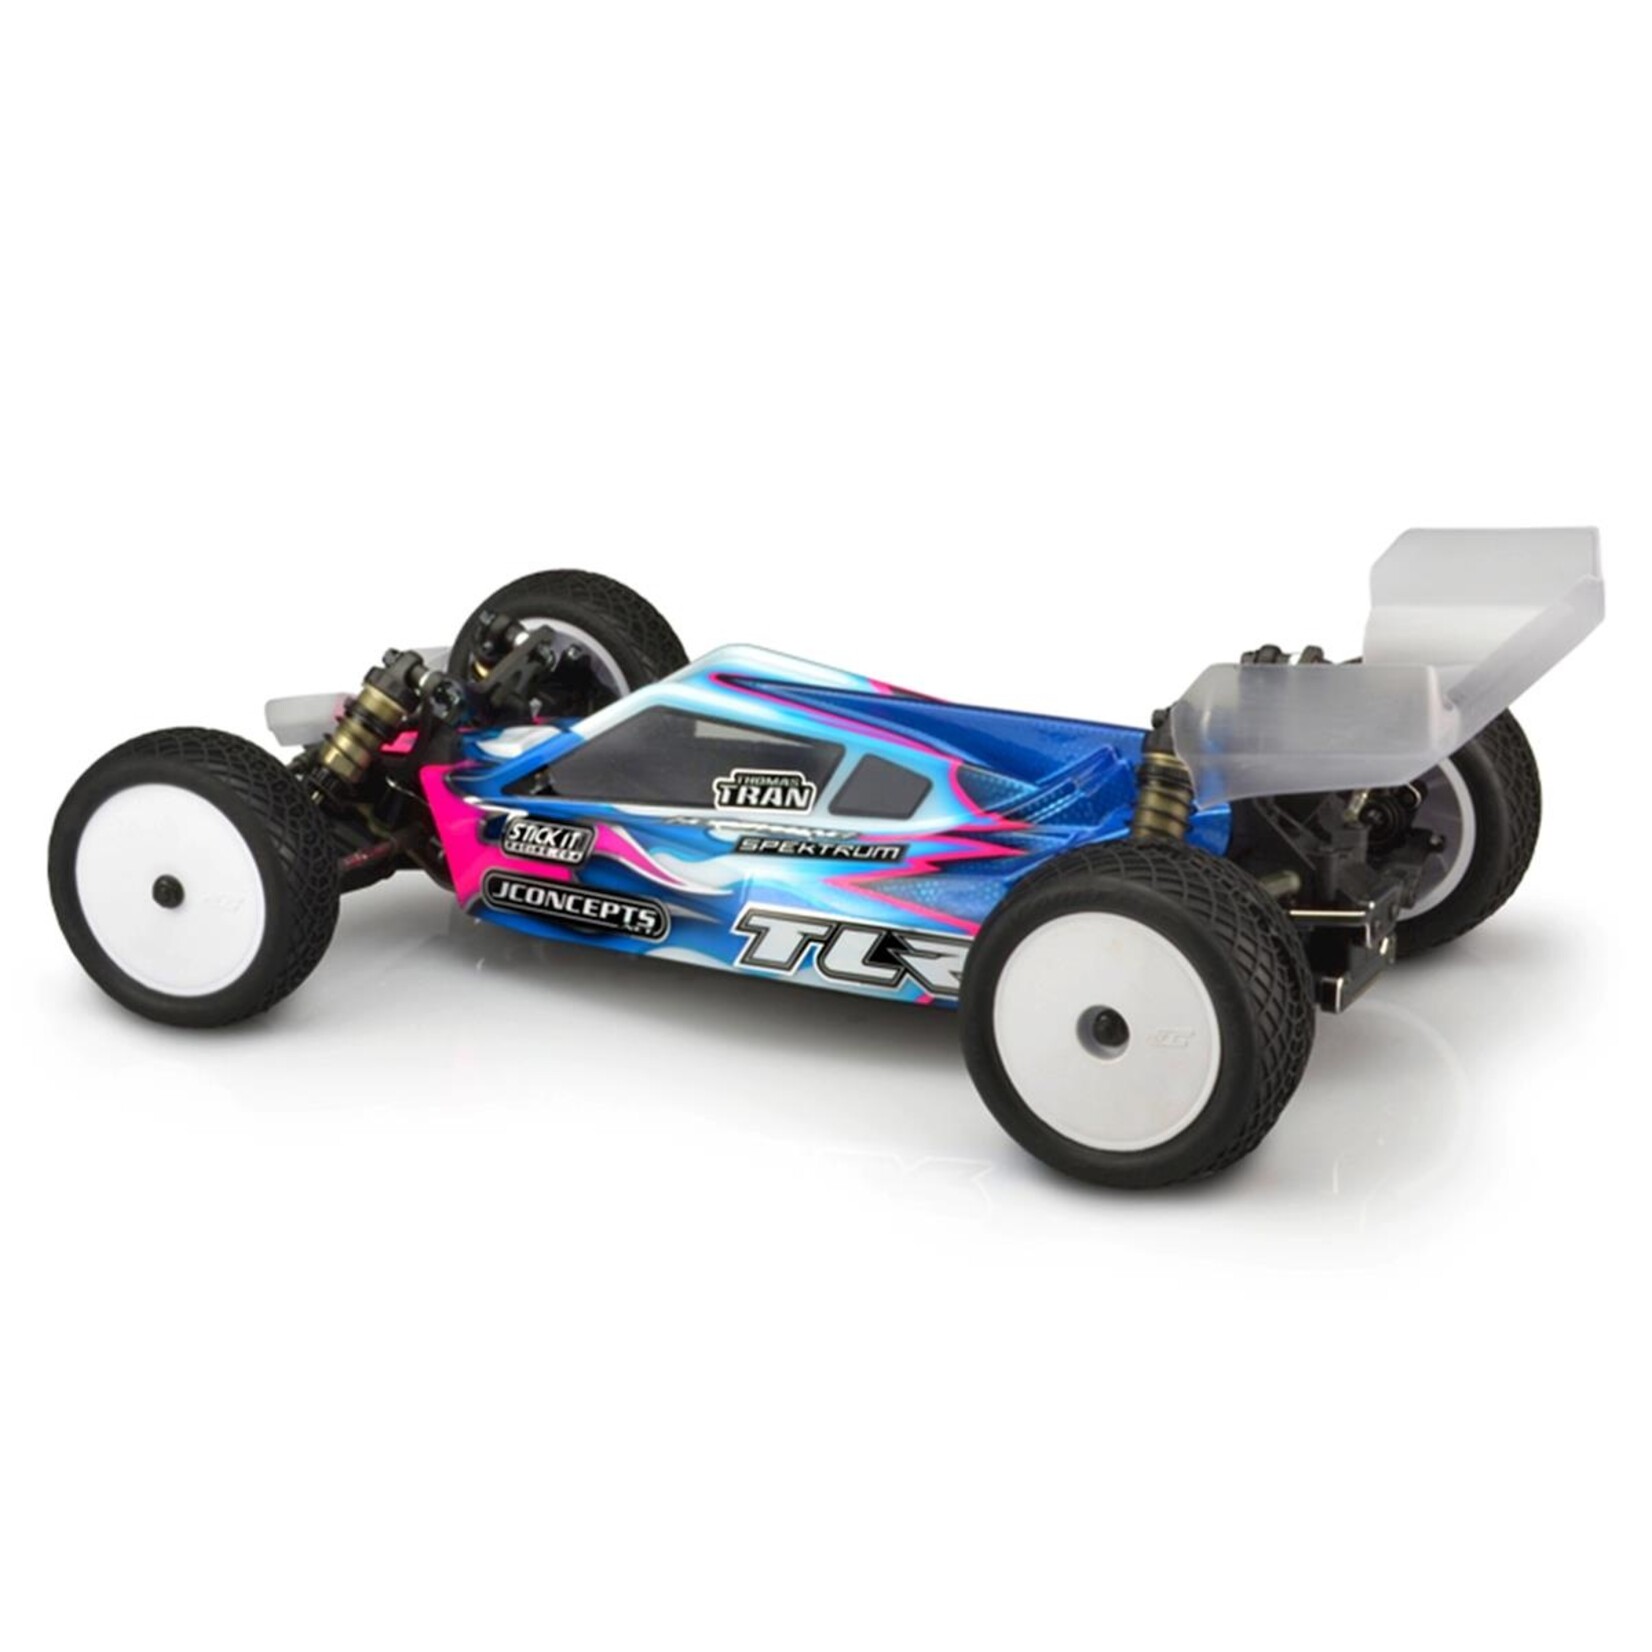 JConcepts JConcepts TLR 22 5.0 Elite "P2" Buggy Body w/S-Type Wing (Clear) #0284